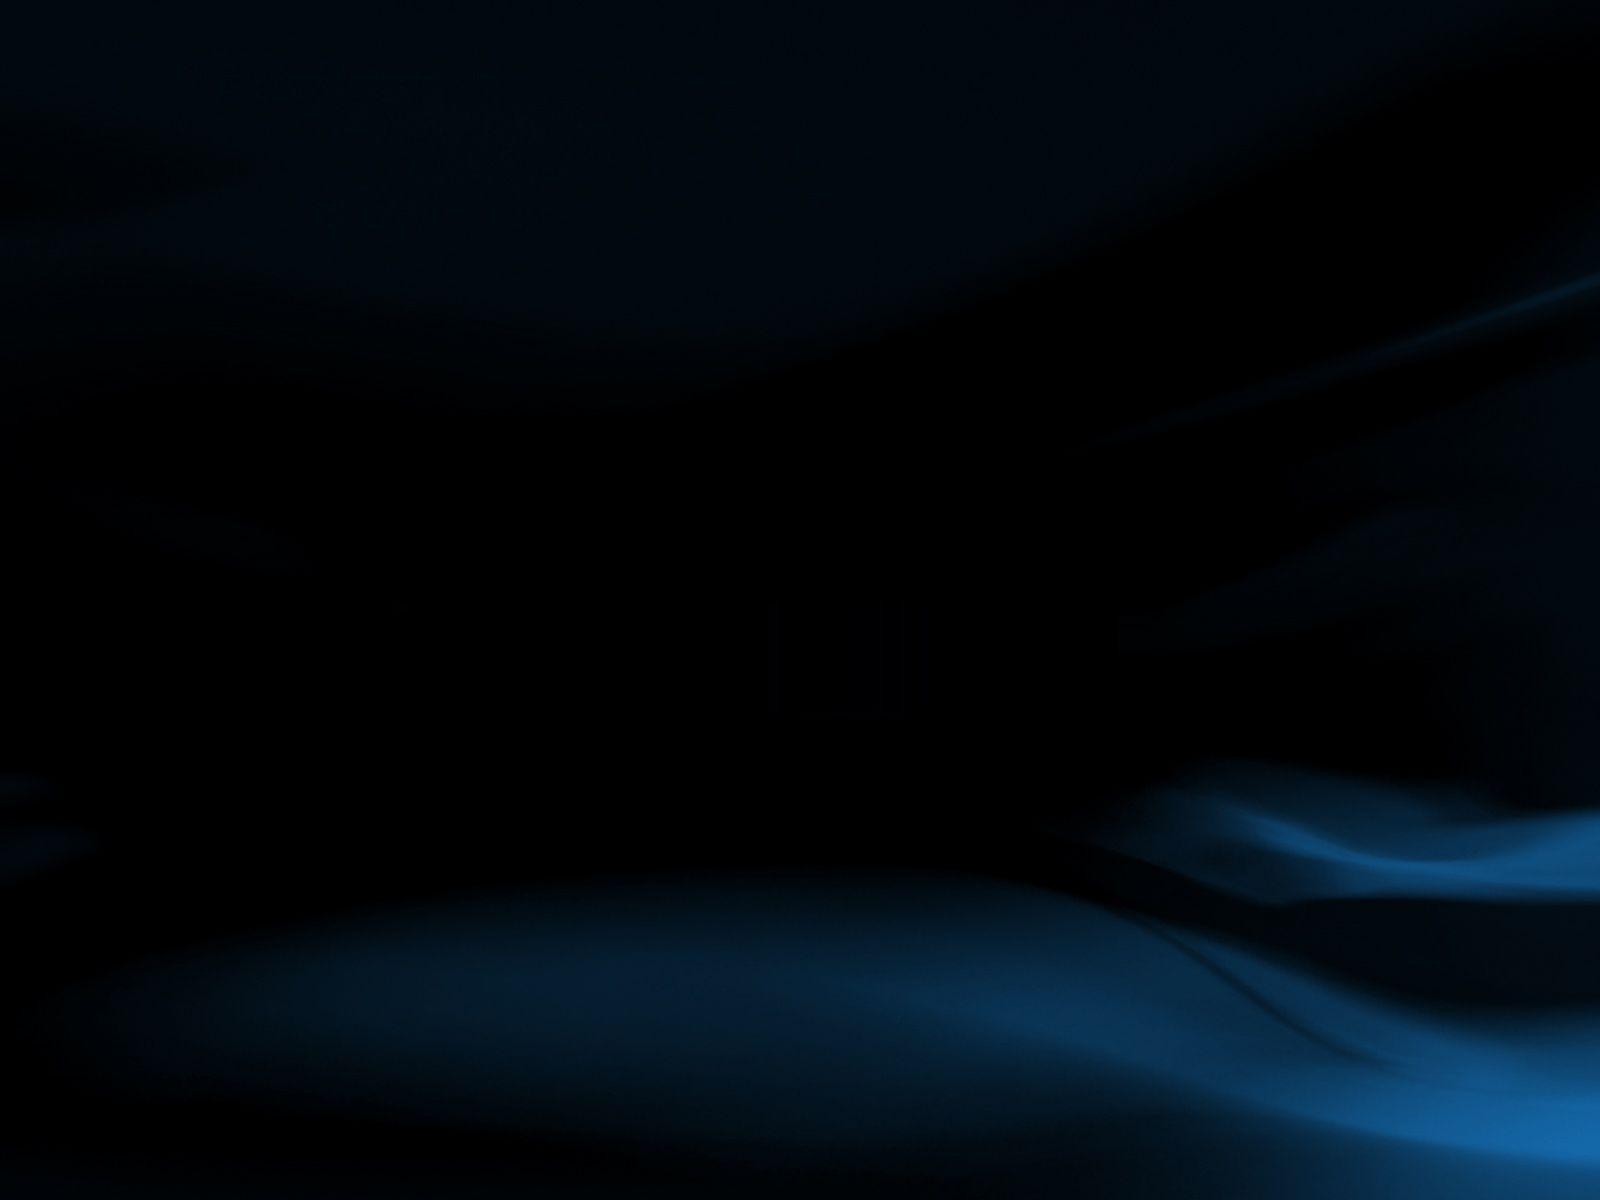 Blue And Black Image 21 Free Wallpaper